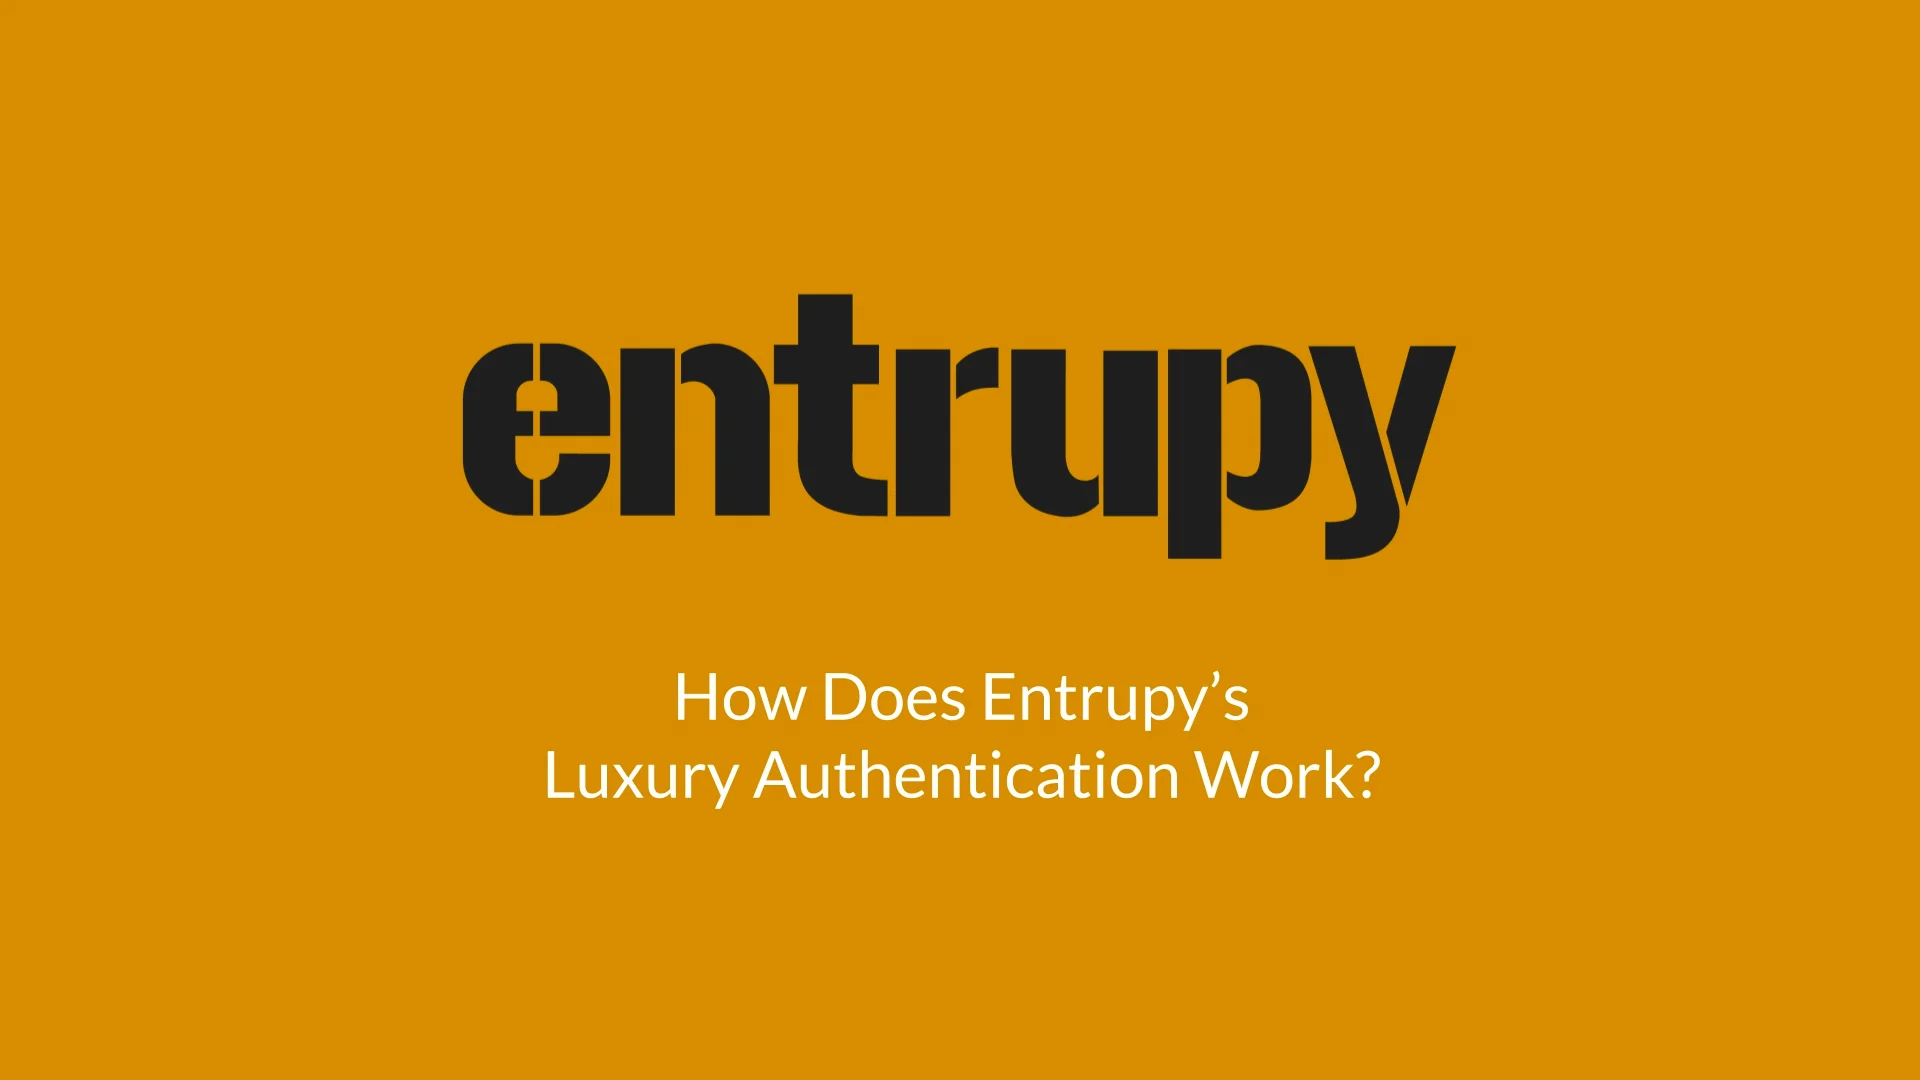 Our authentication service solution is powered by Entrupy, the